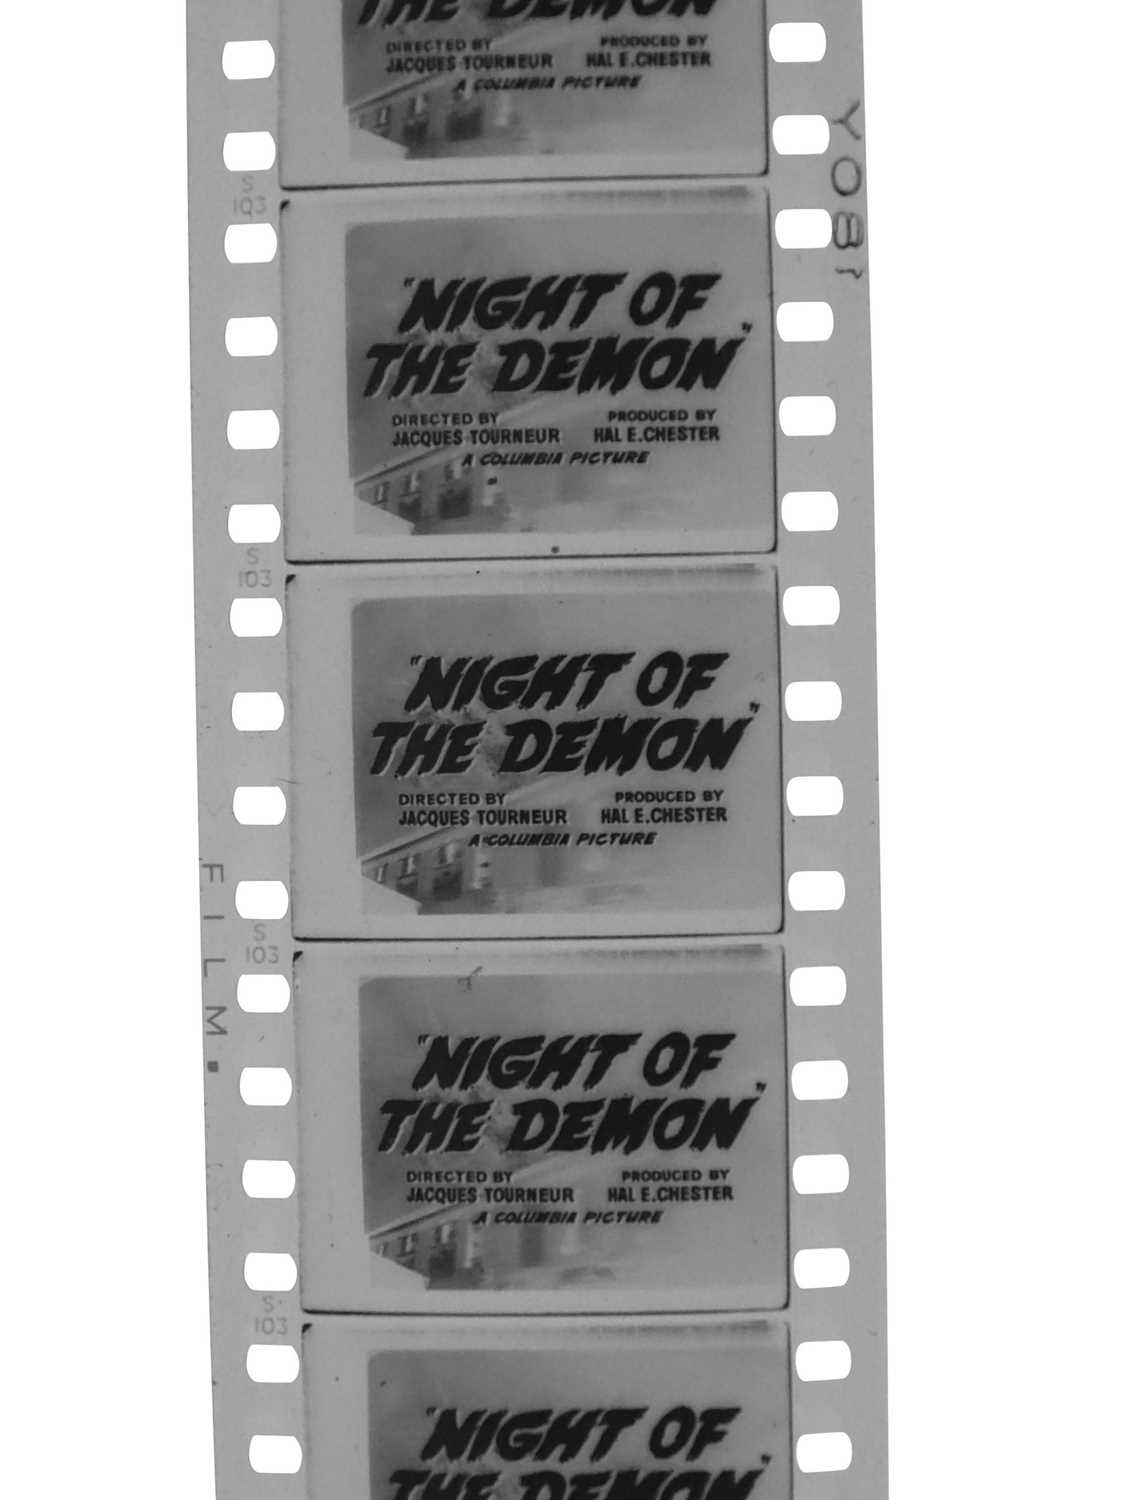 Night Of The Demon (1957) - Image 5 of 6